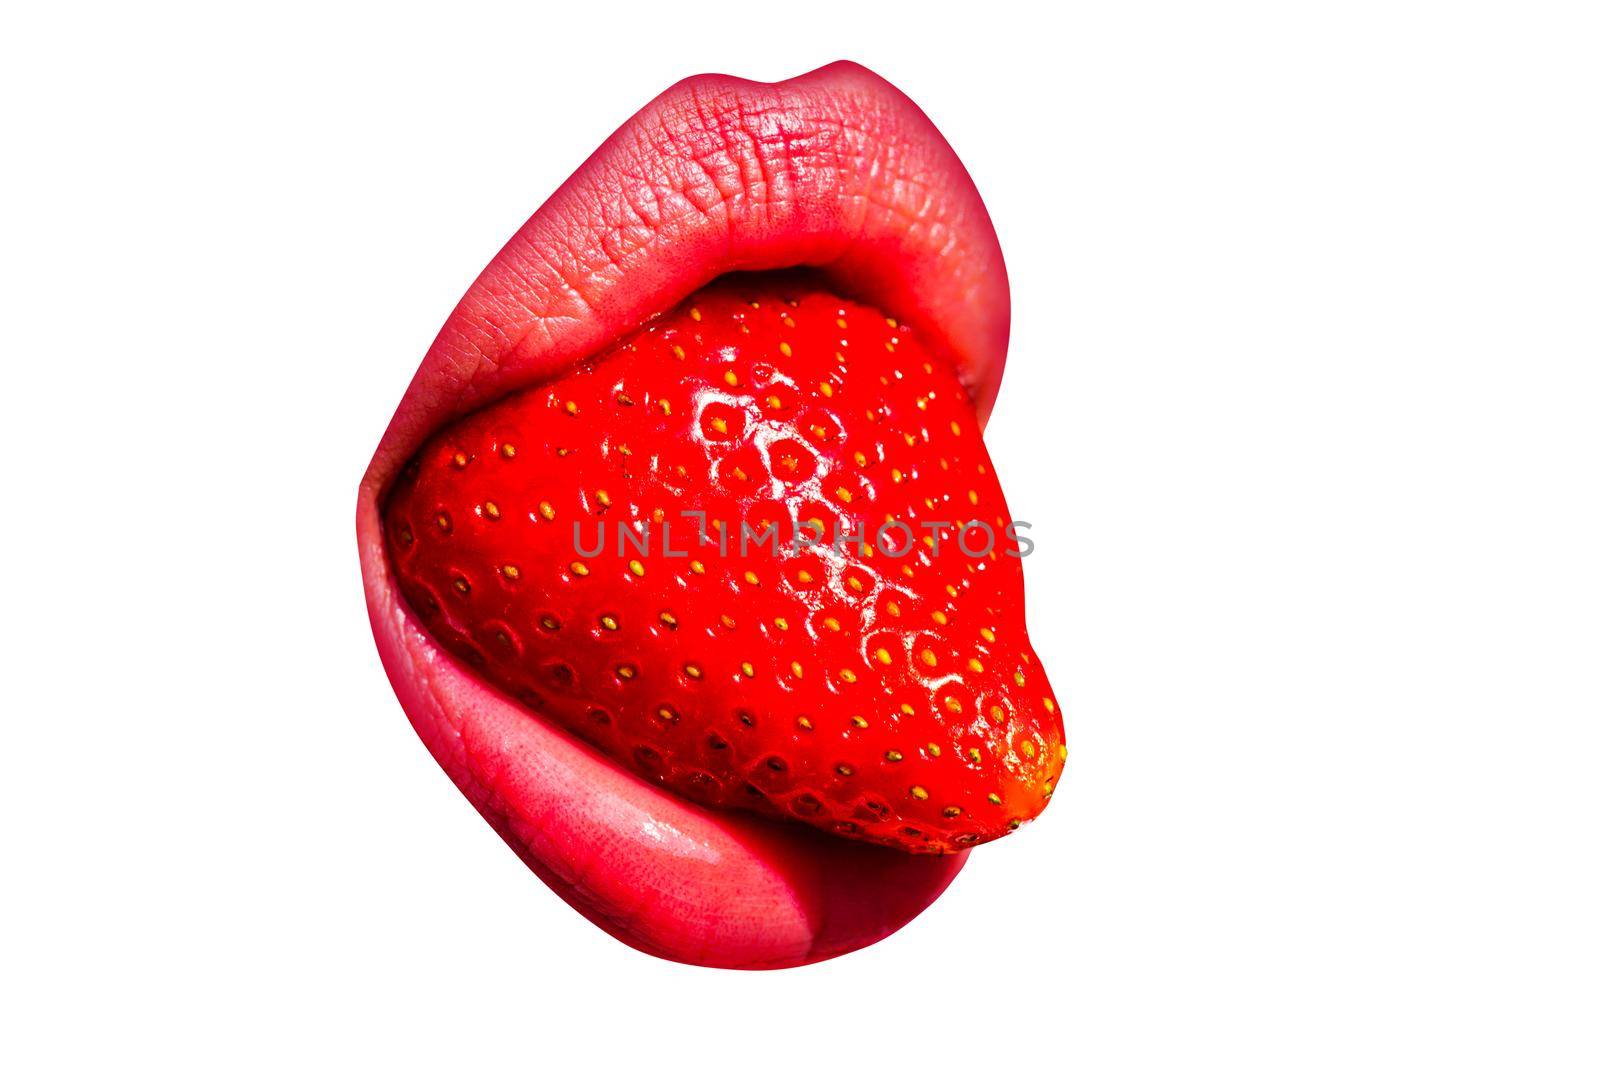 Strawberry tongue, erotica. Sexy woman mouth, passion lick and sensual suck. Summer fruits cocktail, temptation passion desire. Abstract art design, banner. Isolated on white background. by Tverdokhlib